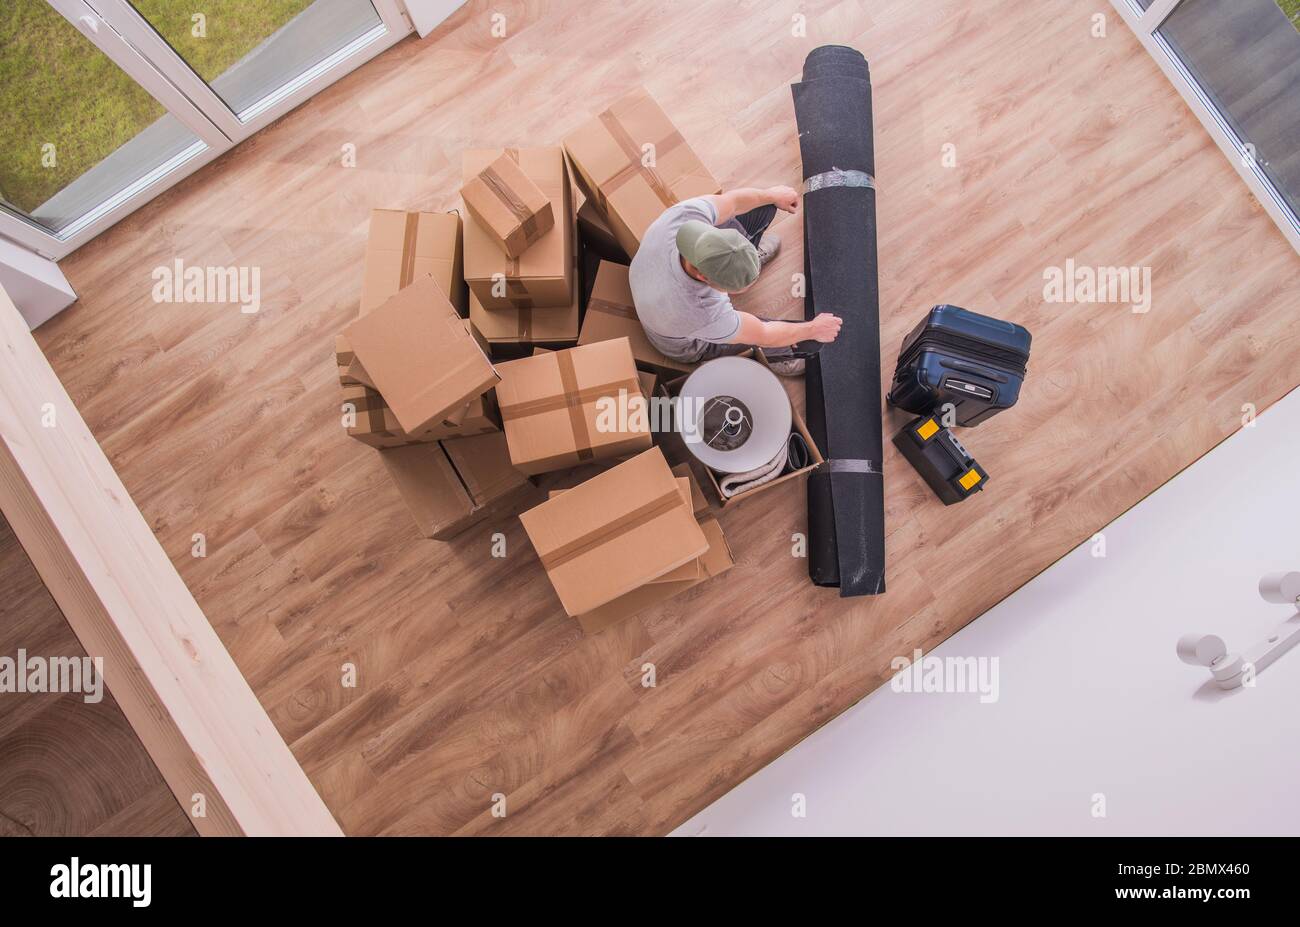 Eagle View Of Mover Male With Packed Boxes And Household Items. Stock Photo